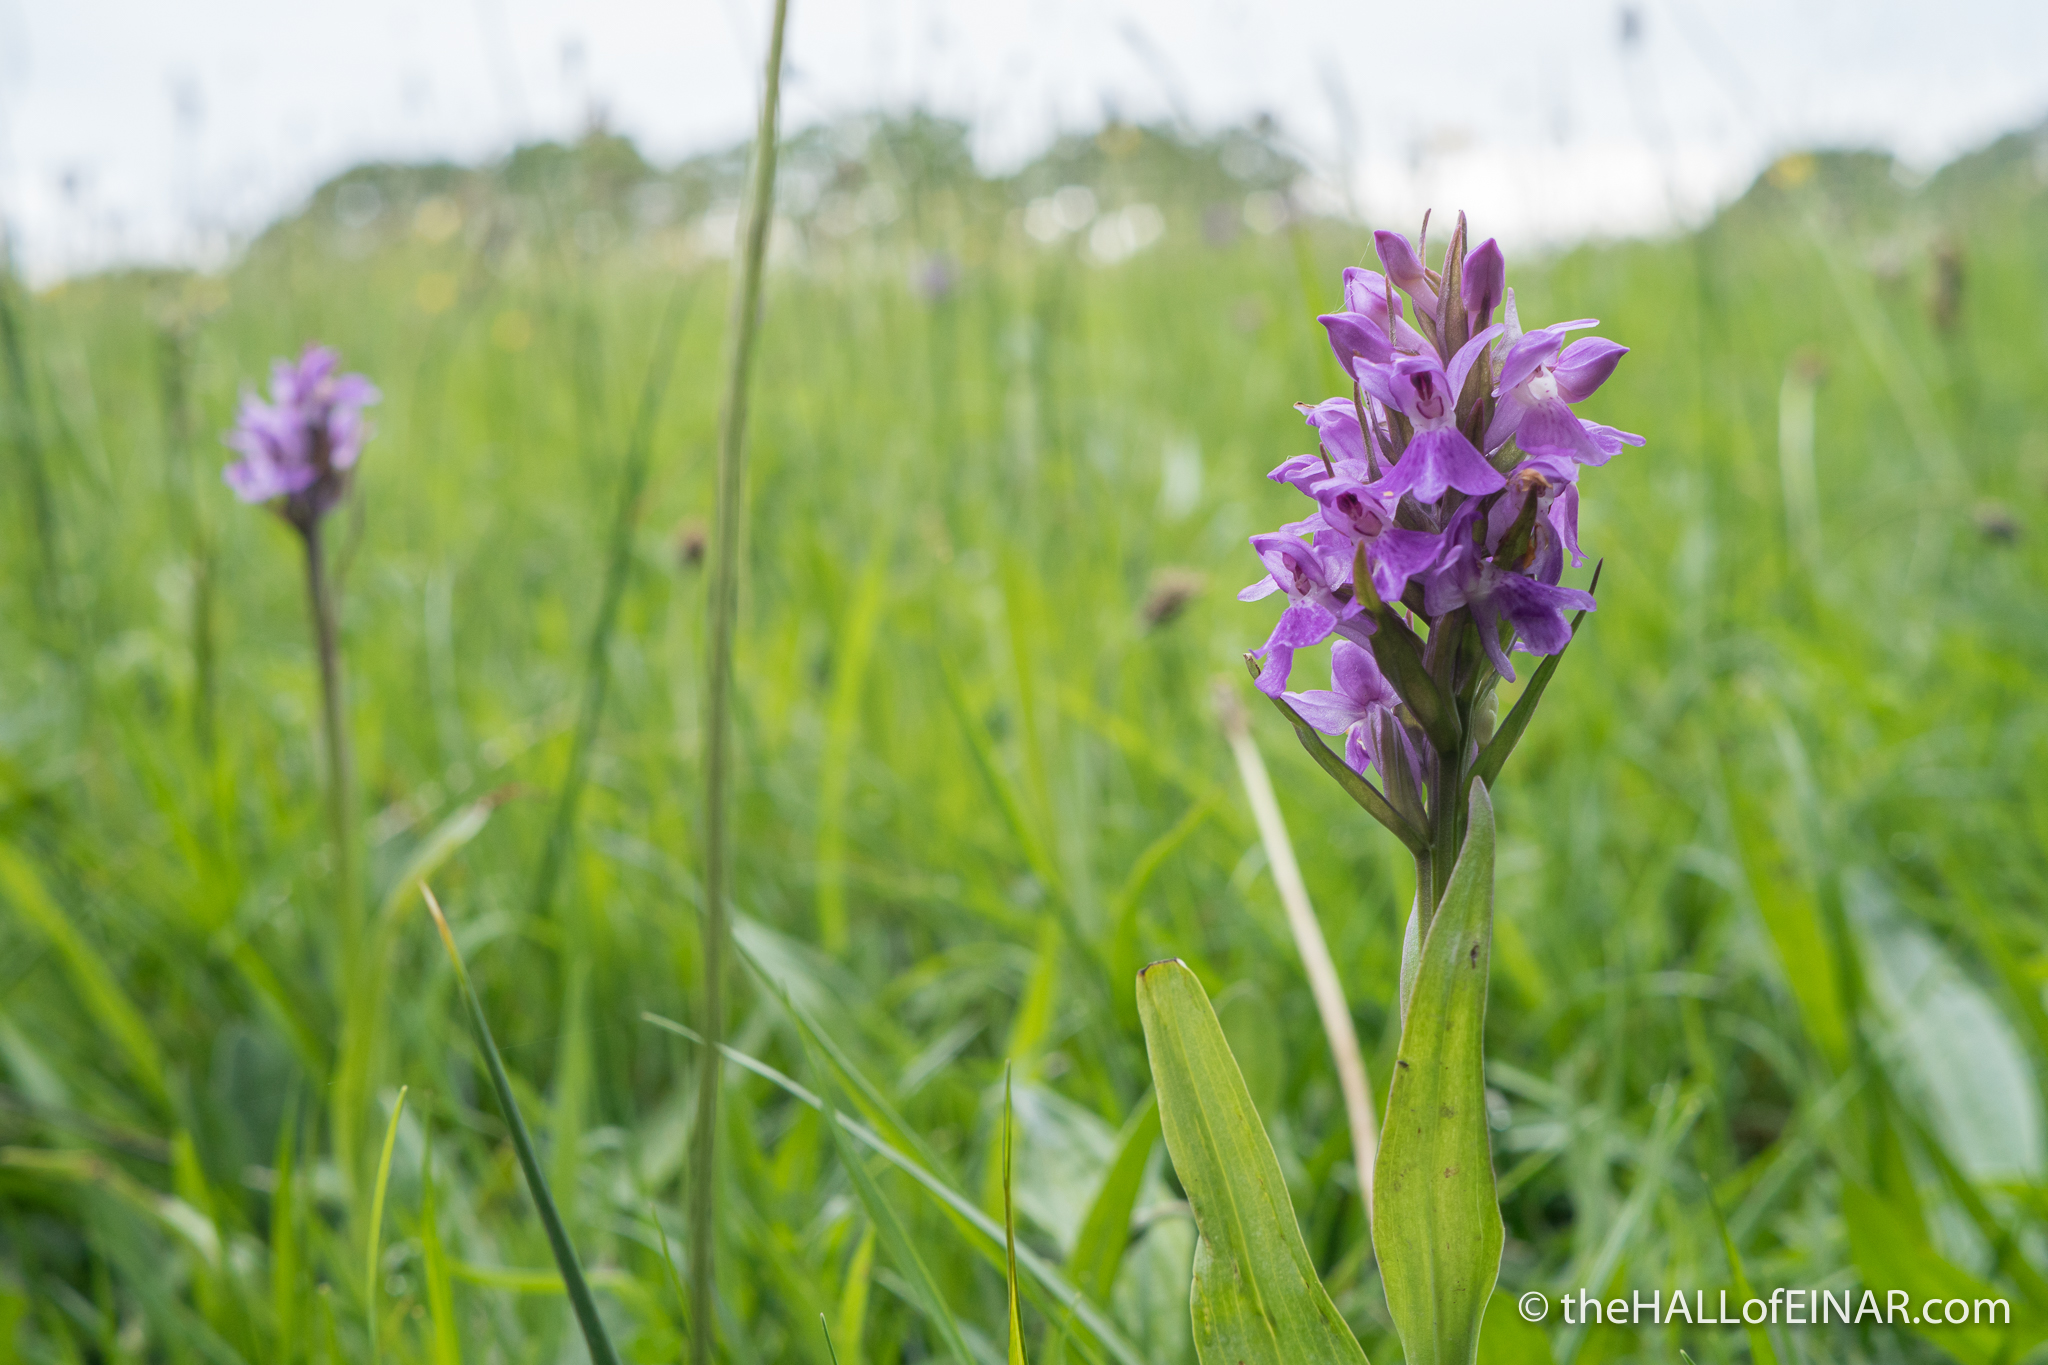 Southern Marsh Orchid - The Hall of Einar - photograph (c) David Bailey (not the)